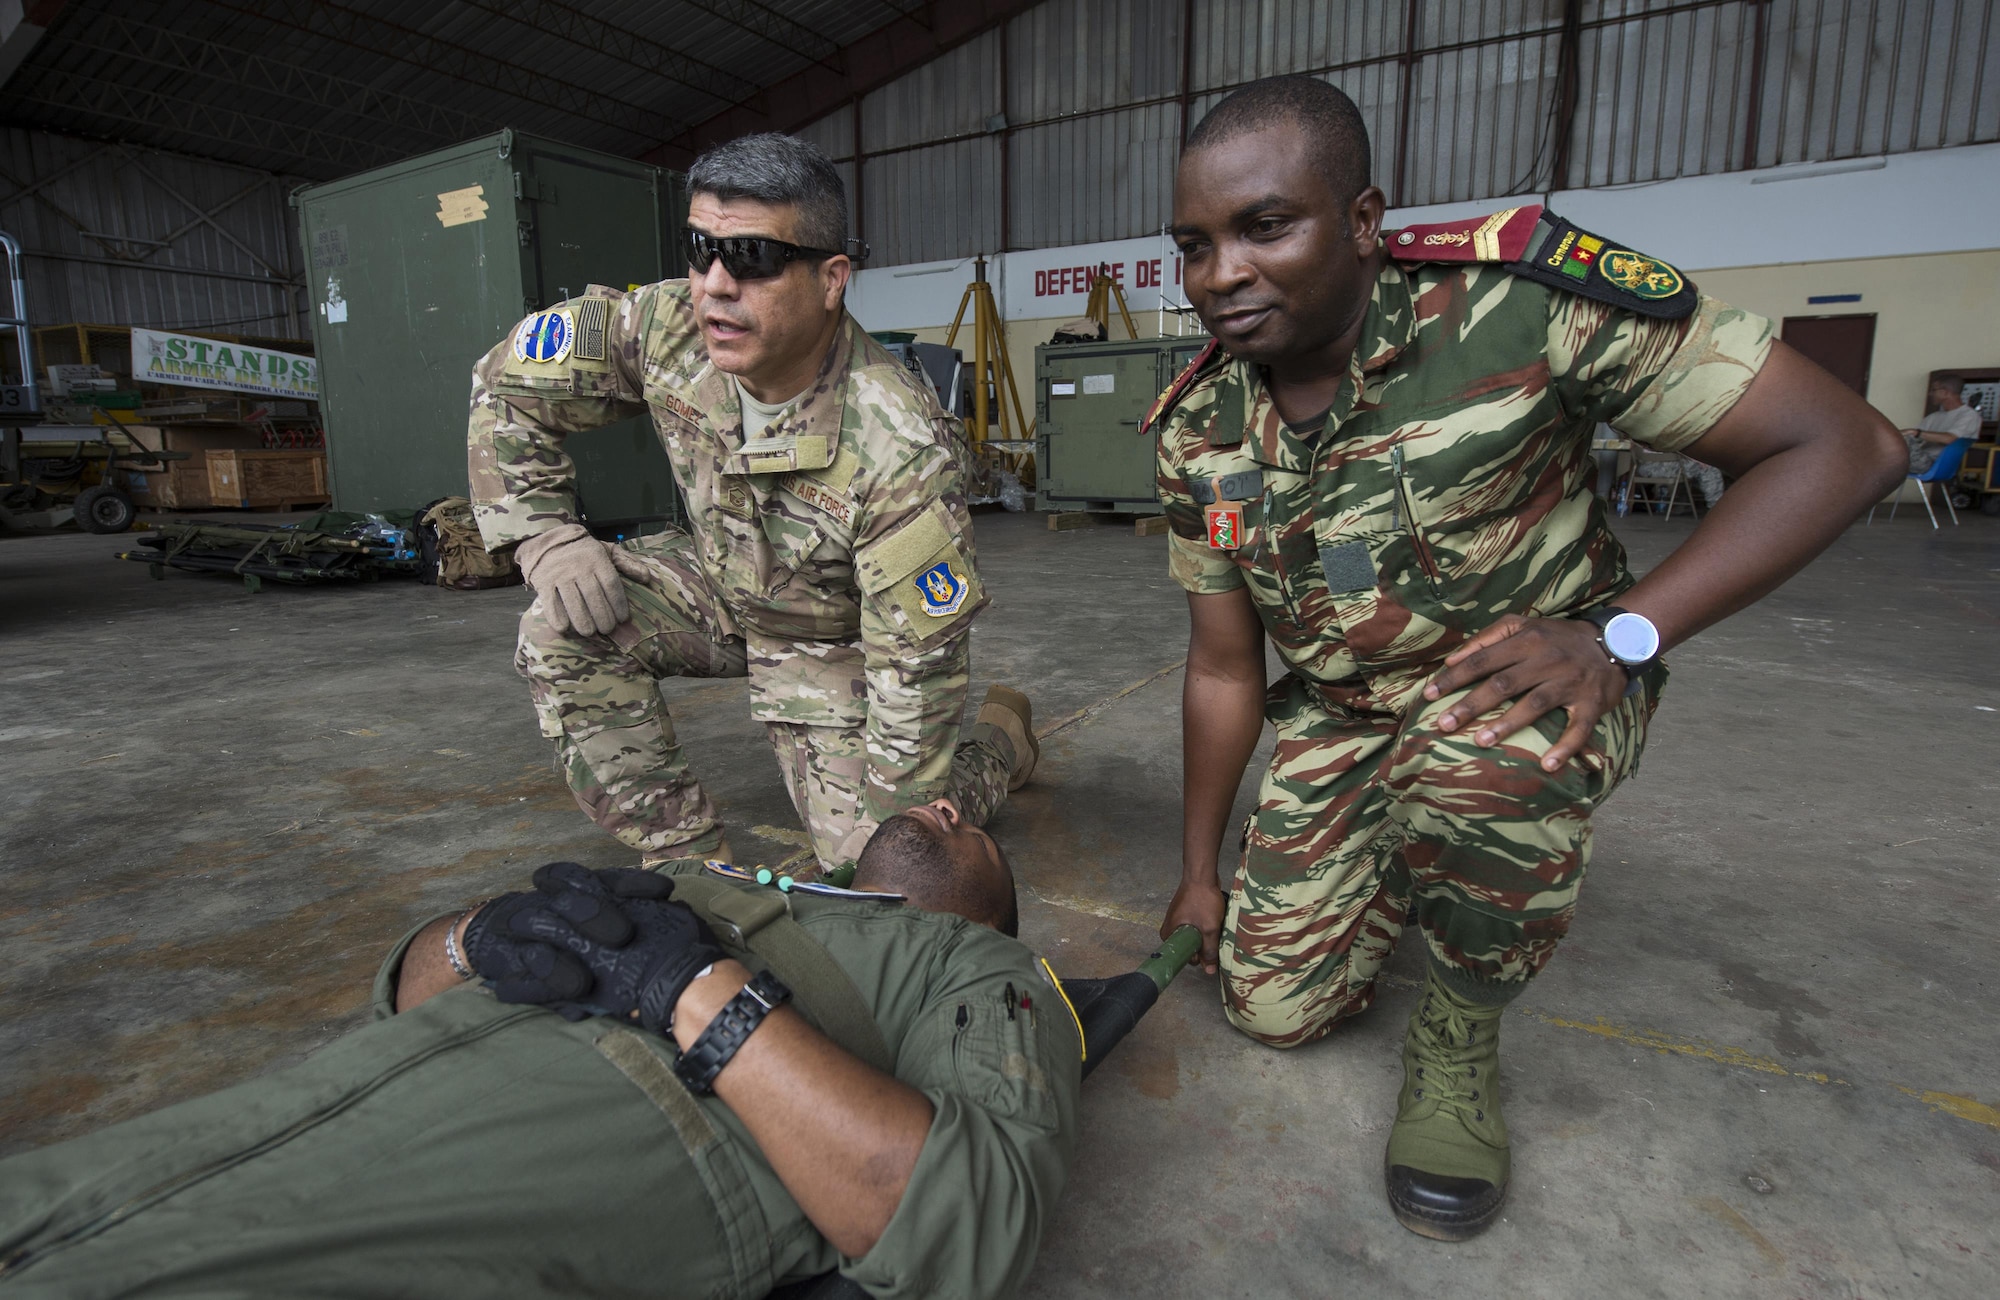 U.S. Air Force Reserve MSgt. Johnny Gomez (left), an aeromedical evacuation technician with the 315th Aeromedical Evacuation Squadron, and a member of the Cameroonian Armed Forces transport a simulated casualty during aeromedical evacuation training at this year’s Central Accord exercise in Libreville, Gabon on June 14, 2016. U.S. Army Africa’s exercise Central Accord 2016 is an annual, combined, joint military exercise that brings together partner nations to practice and demonstrate proficiency in conducting peacekeeping operations. (DoD News photo by TSgt Brian Kimball)